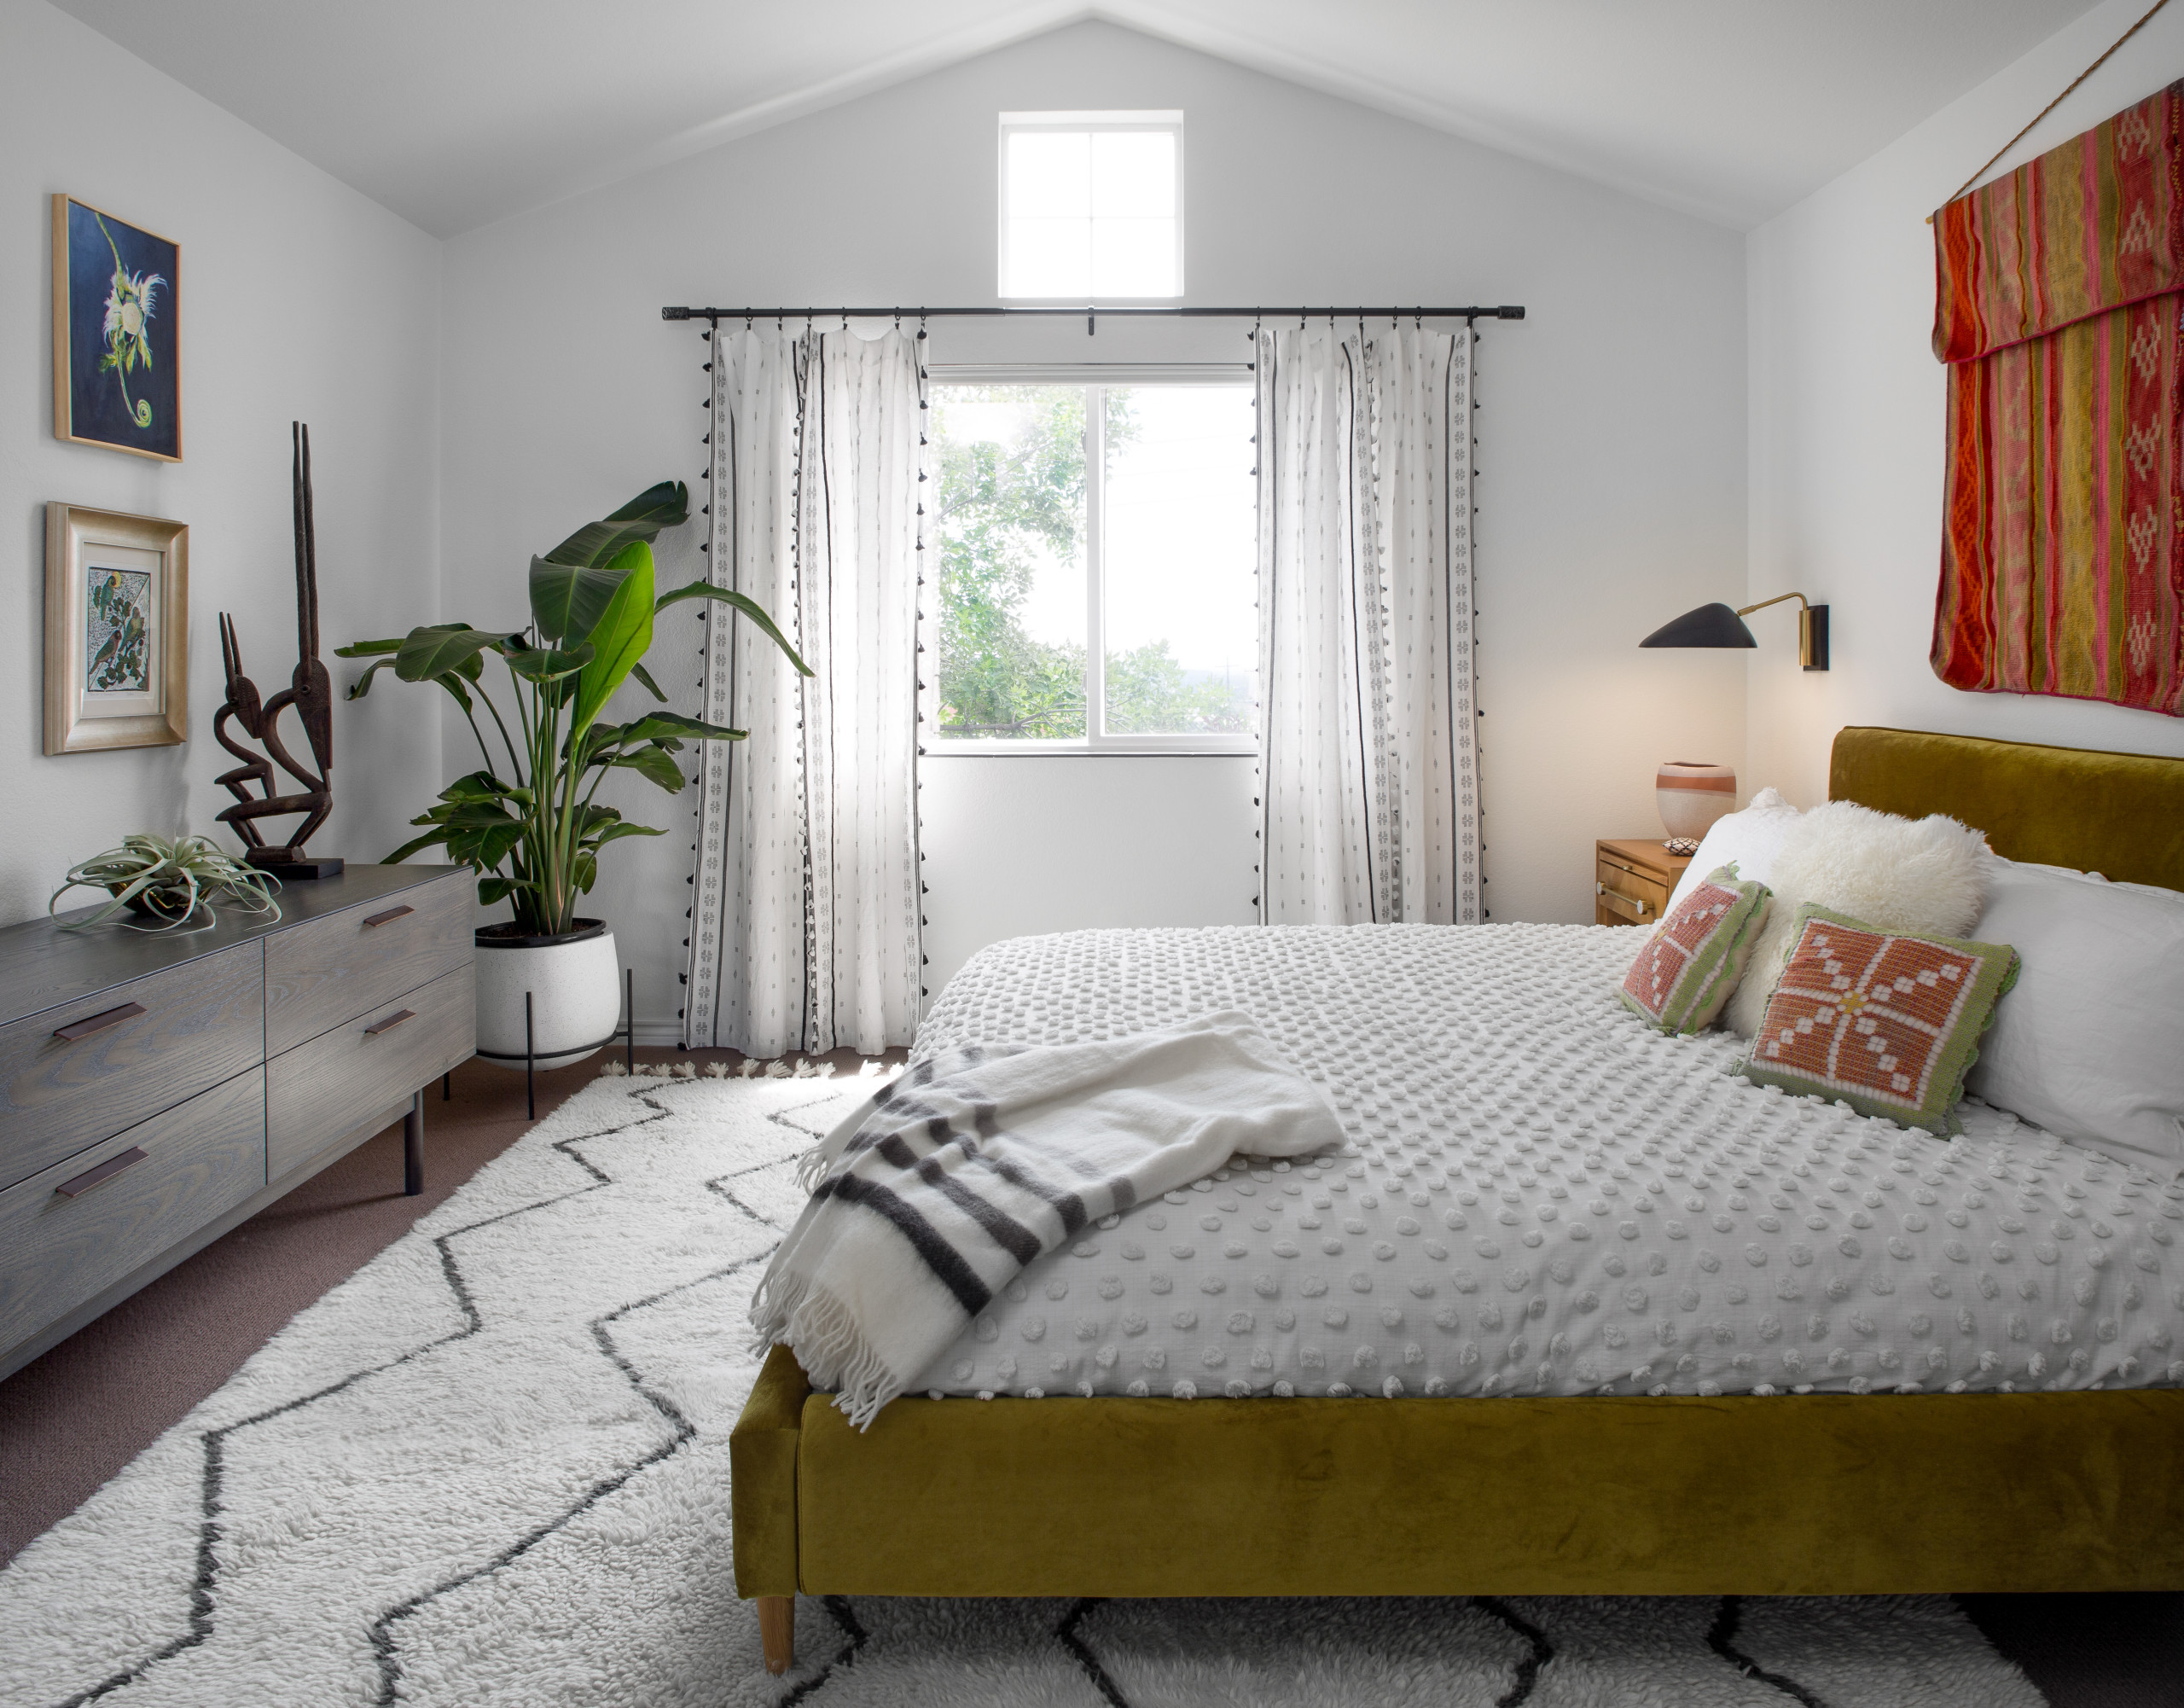 Ah, the bedroom! With our tight budget, we opted to keep the original berber carpet and add an area rug. We ordered the chartreuse velvet bed from Interior Define. The coverlet is from Urban Outfitter